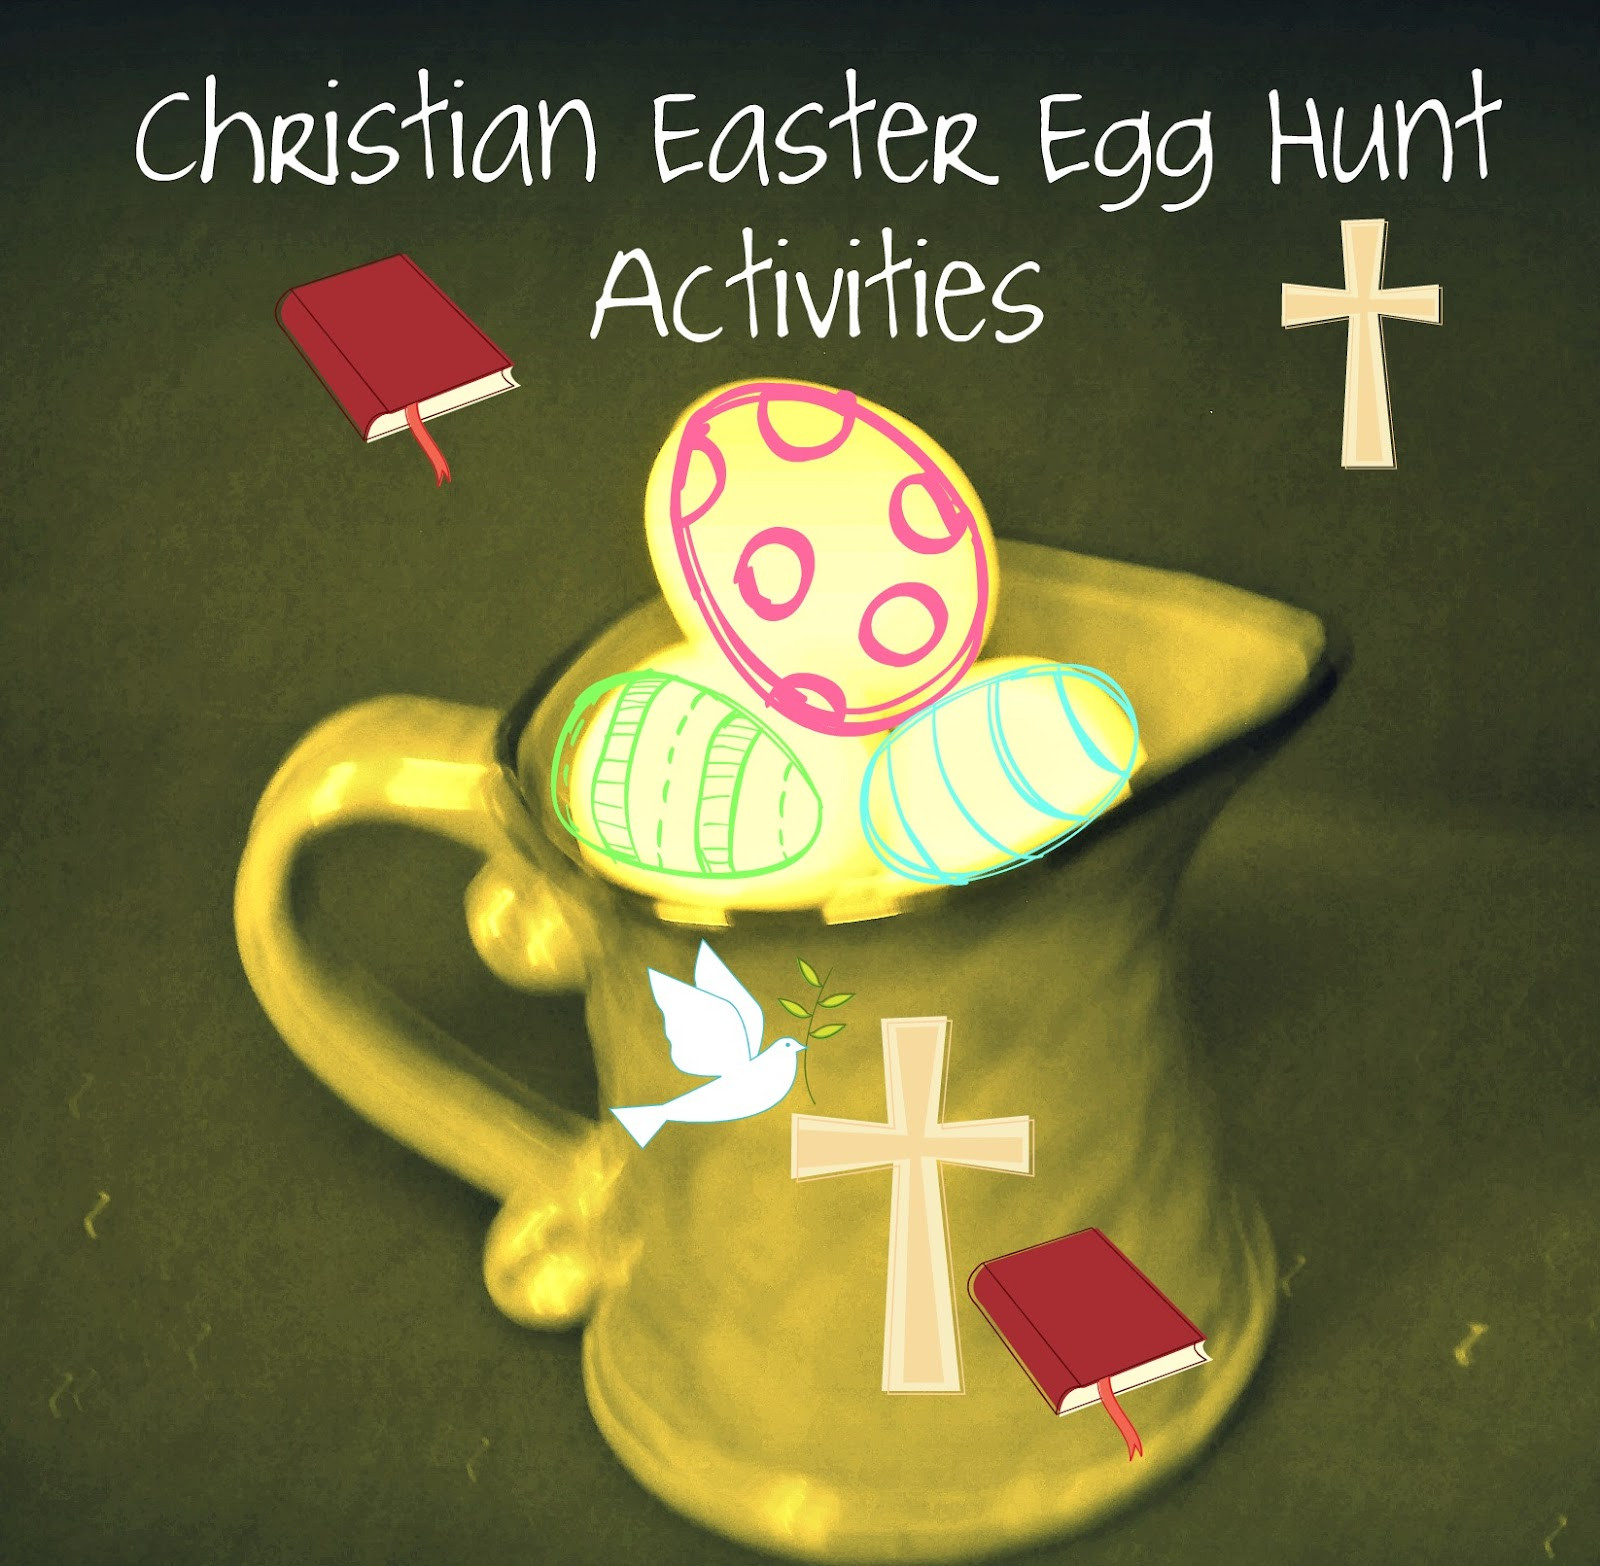 Christian Easter Party Ideas For Kids
 Pins and Princesses Christian Easter Egg Hunt Activities